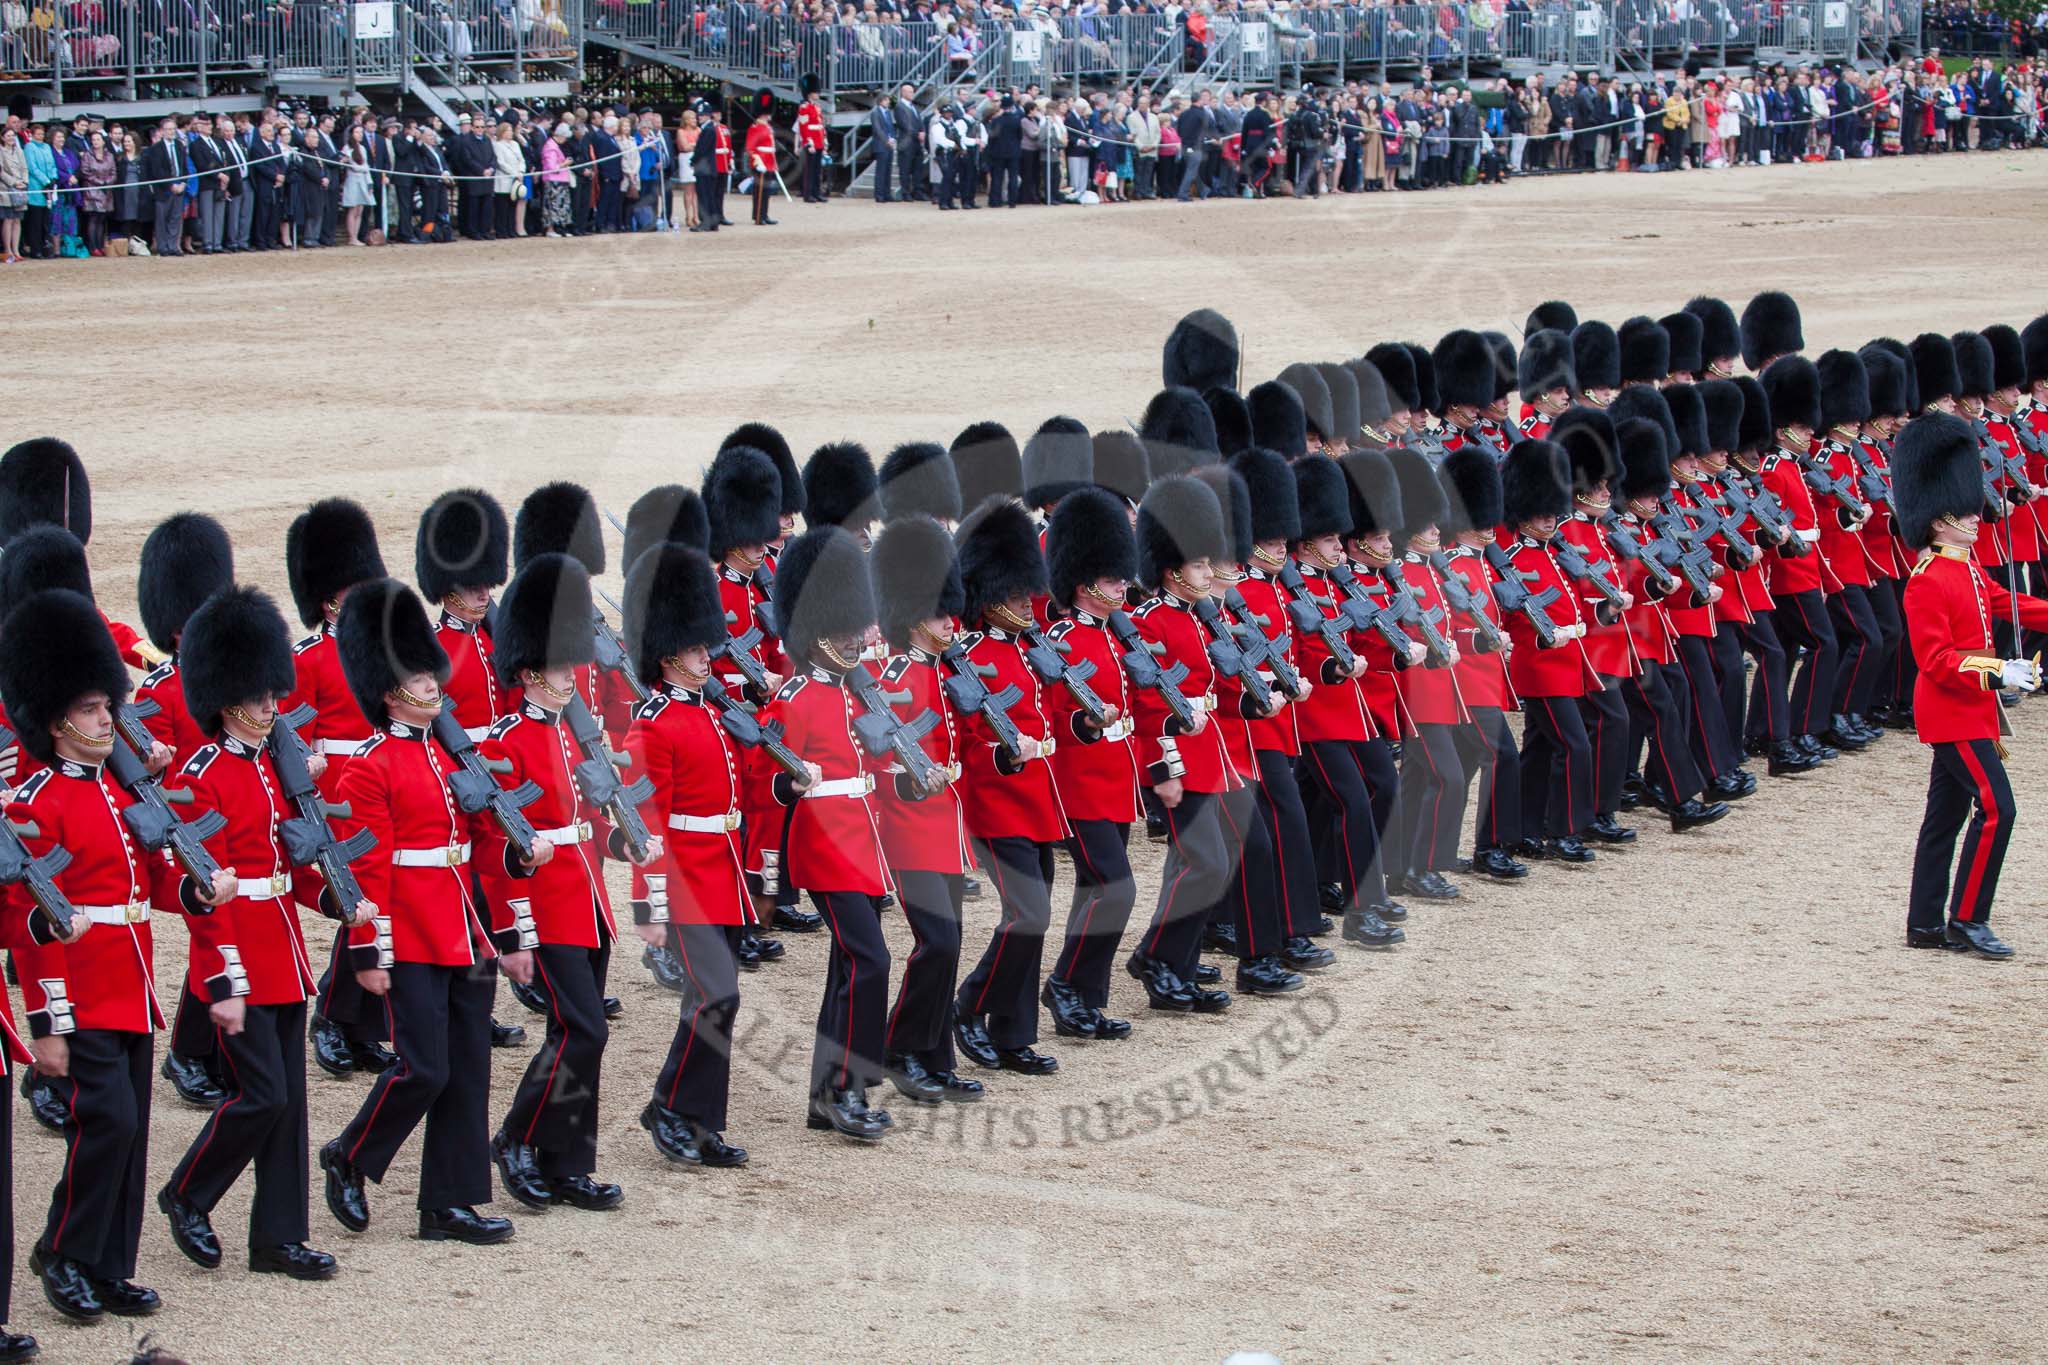 Trooping the Colour 2012: The March Past in Quick Time, here No. No. 6 Guard, F Company Scots Guards..
Horse Guards Parade, Westminster,
London SW1,

United Kingdom,
on 16 June 2012 at 11:46, image #497